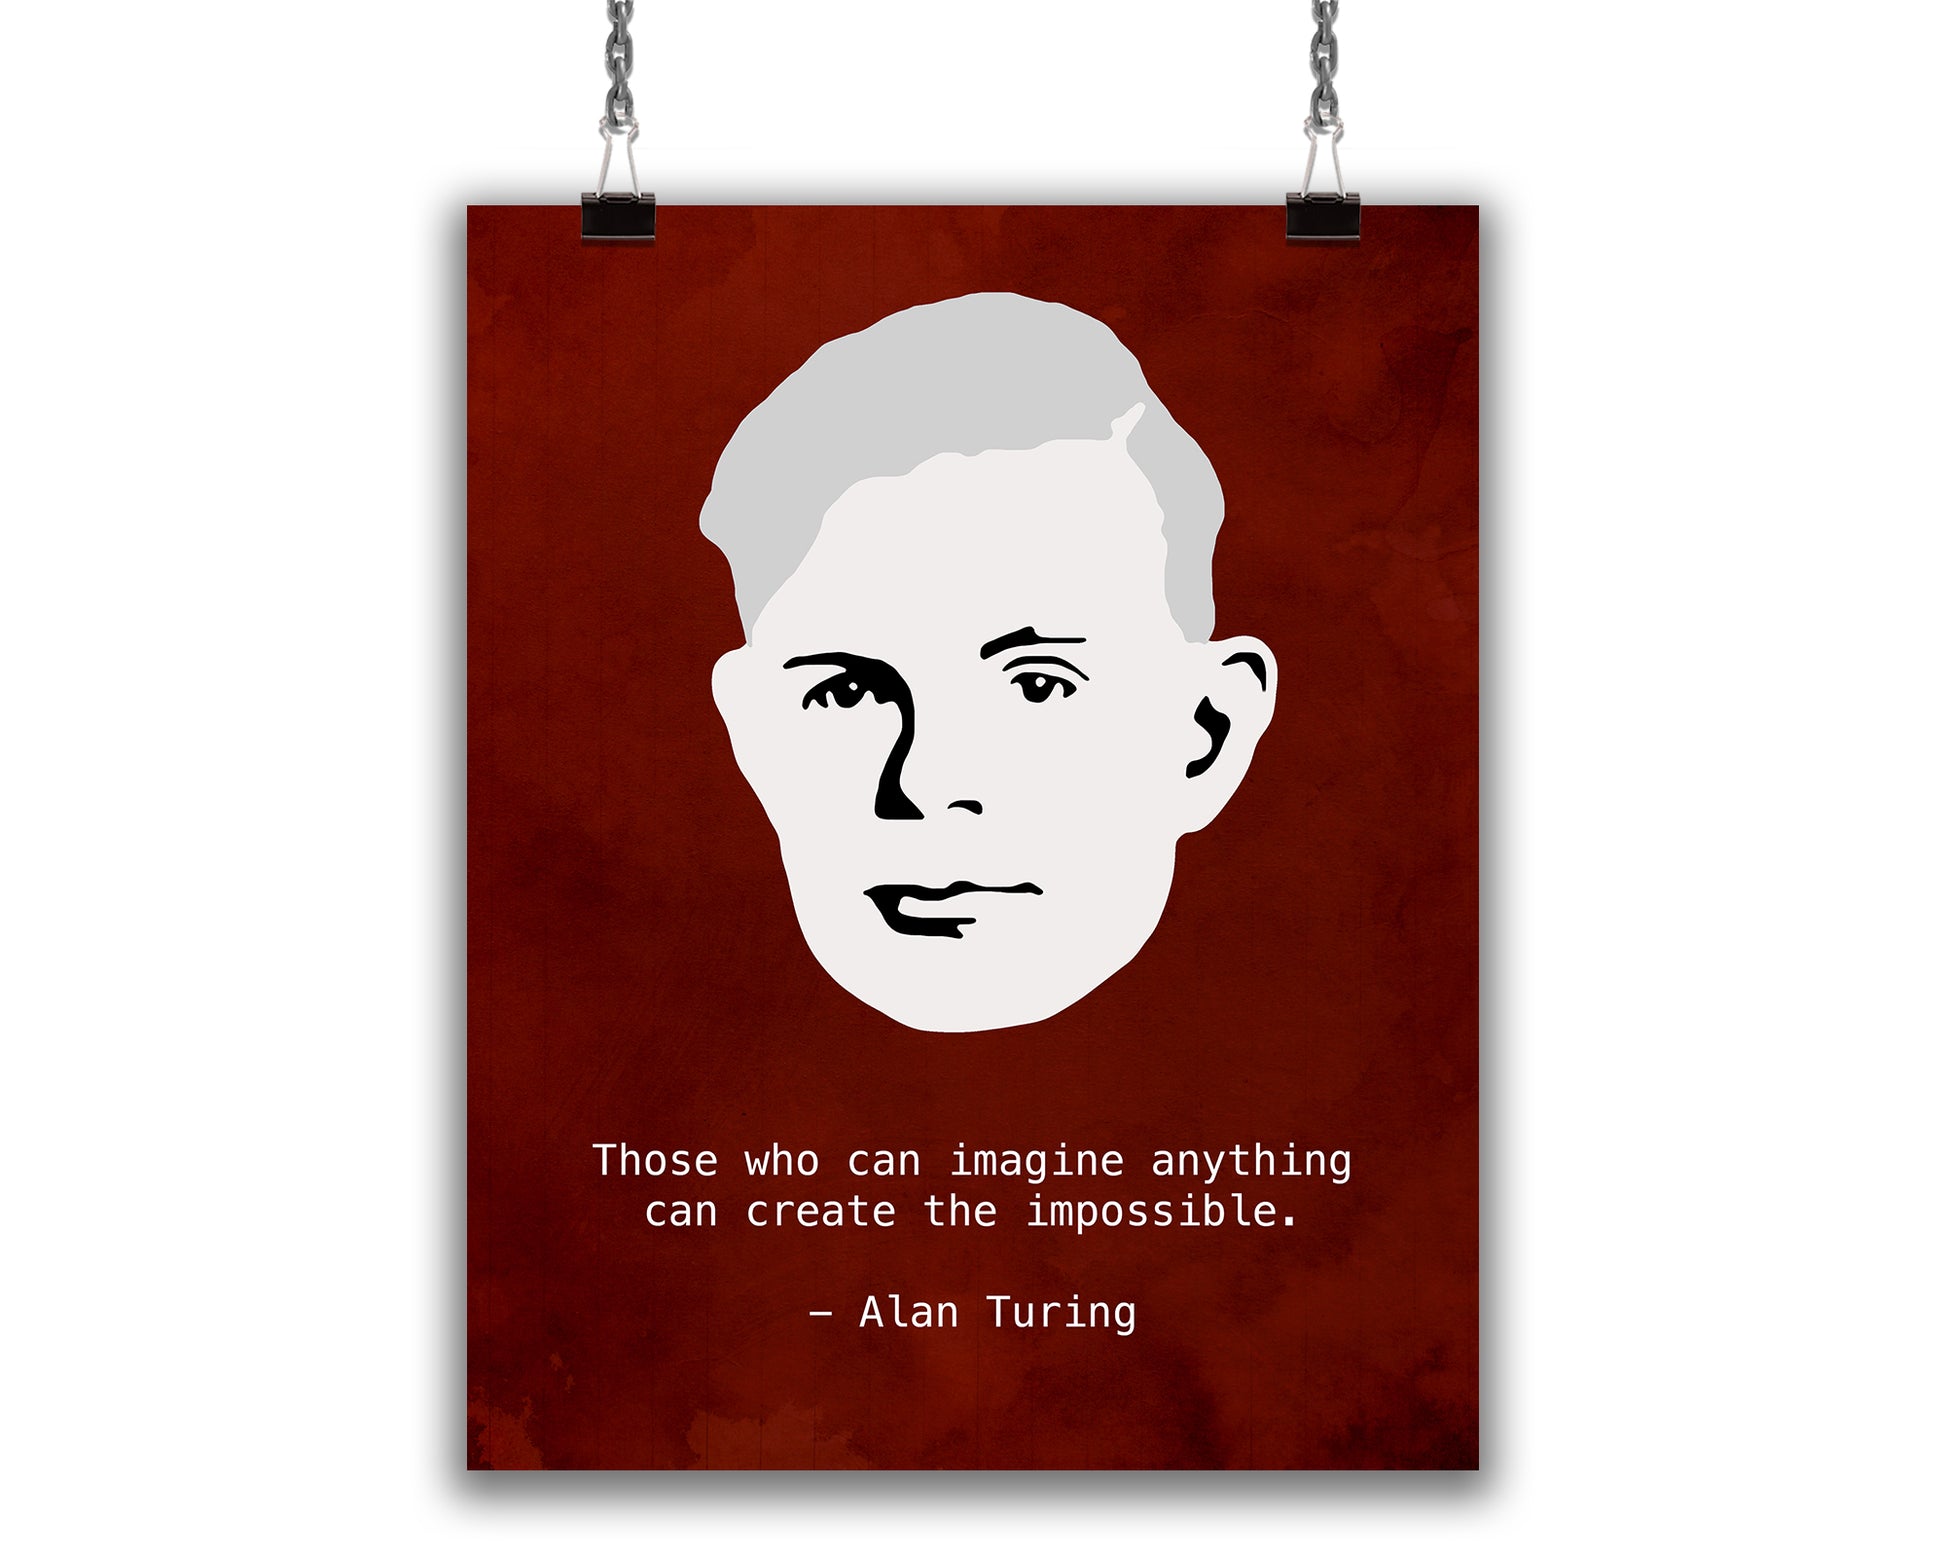 art print with a minimalist portrait of computer scientist Alan Turing and his quote, "Those who can imagine anything can create the impossible.